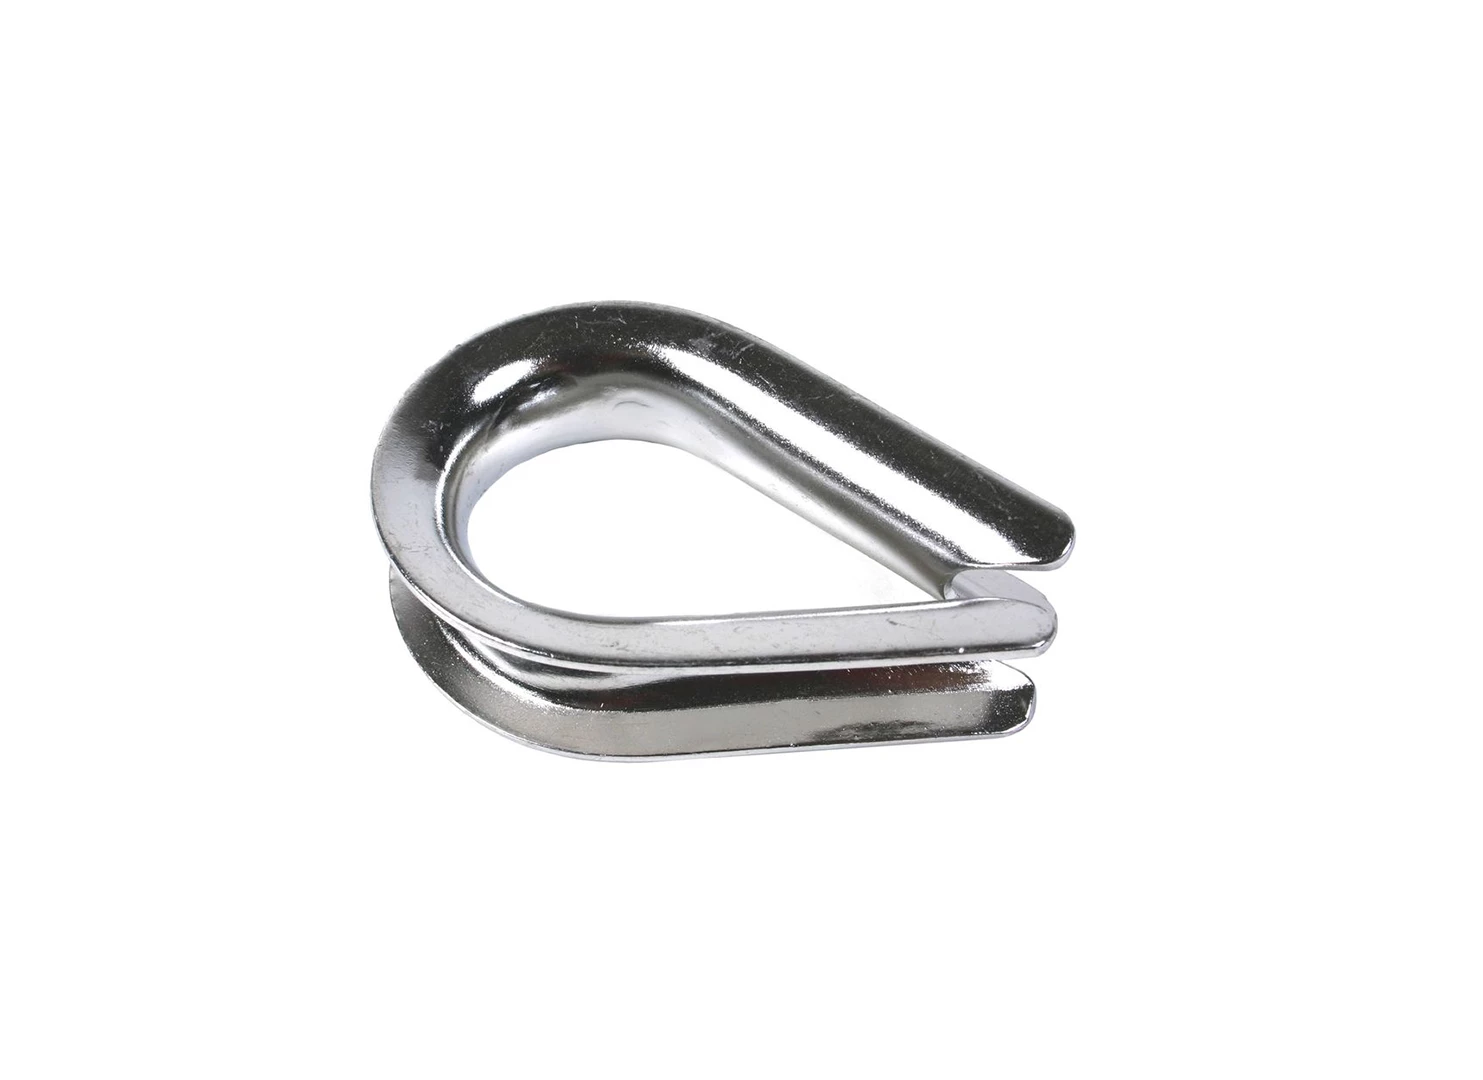 Product: Thimble 17-18mm